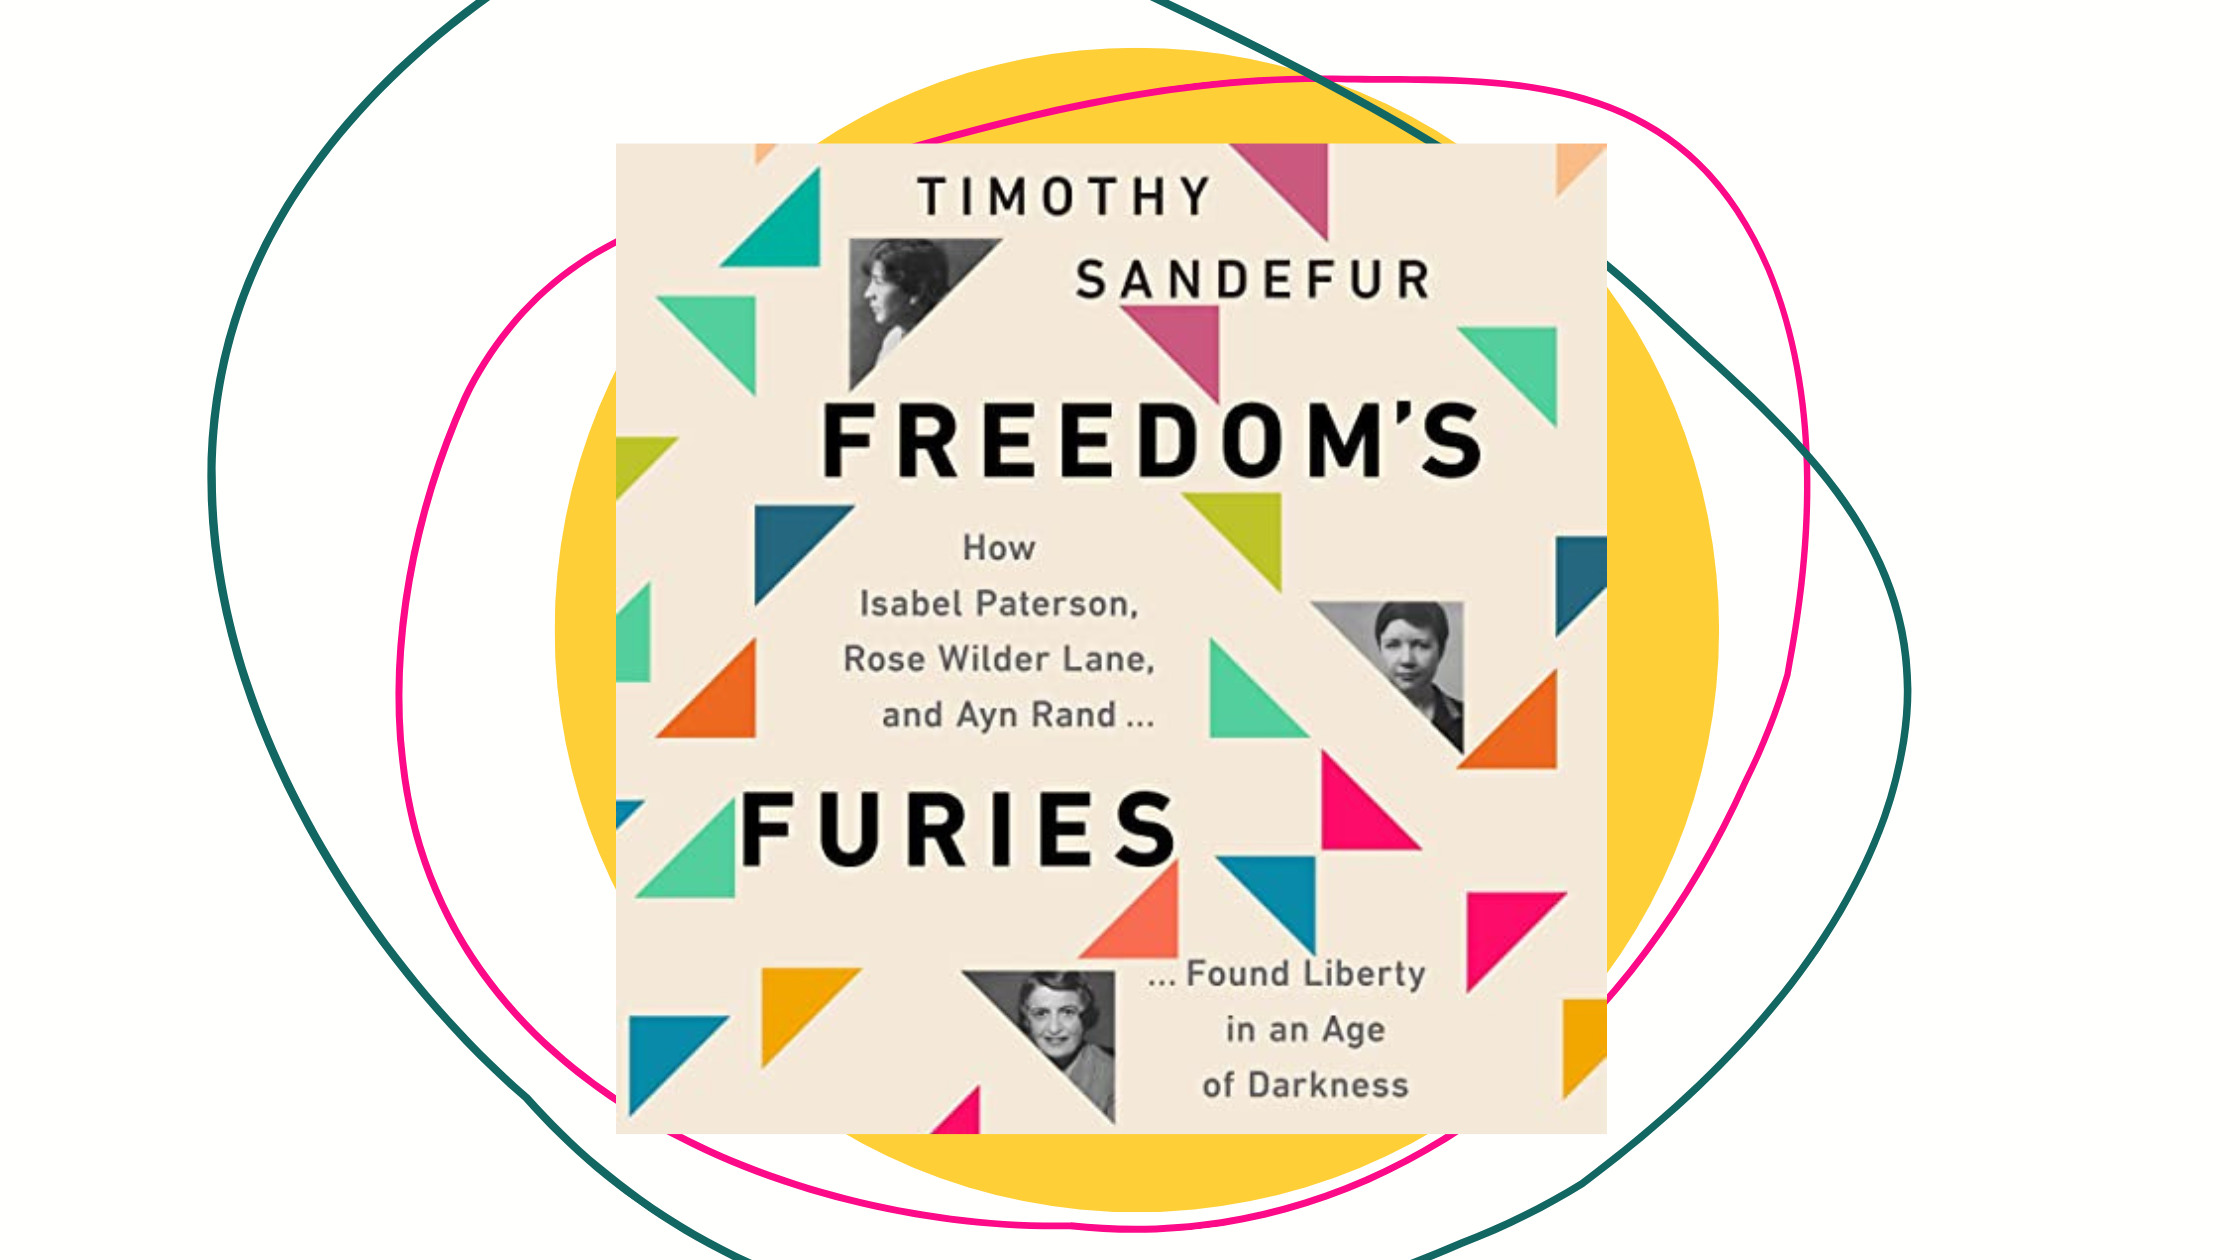 Freedom’s Furies: How Isabel Paterson, Rose Wilder Lane, and Ayn Rand Found Liberty in an Age of Darkness